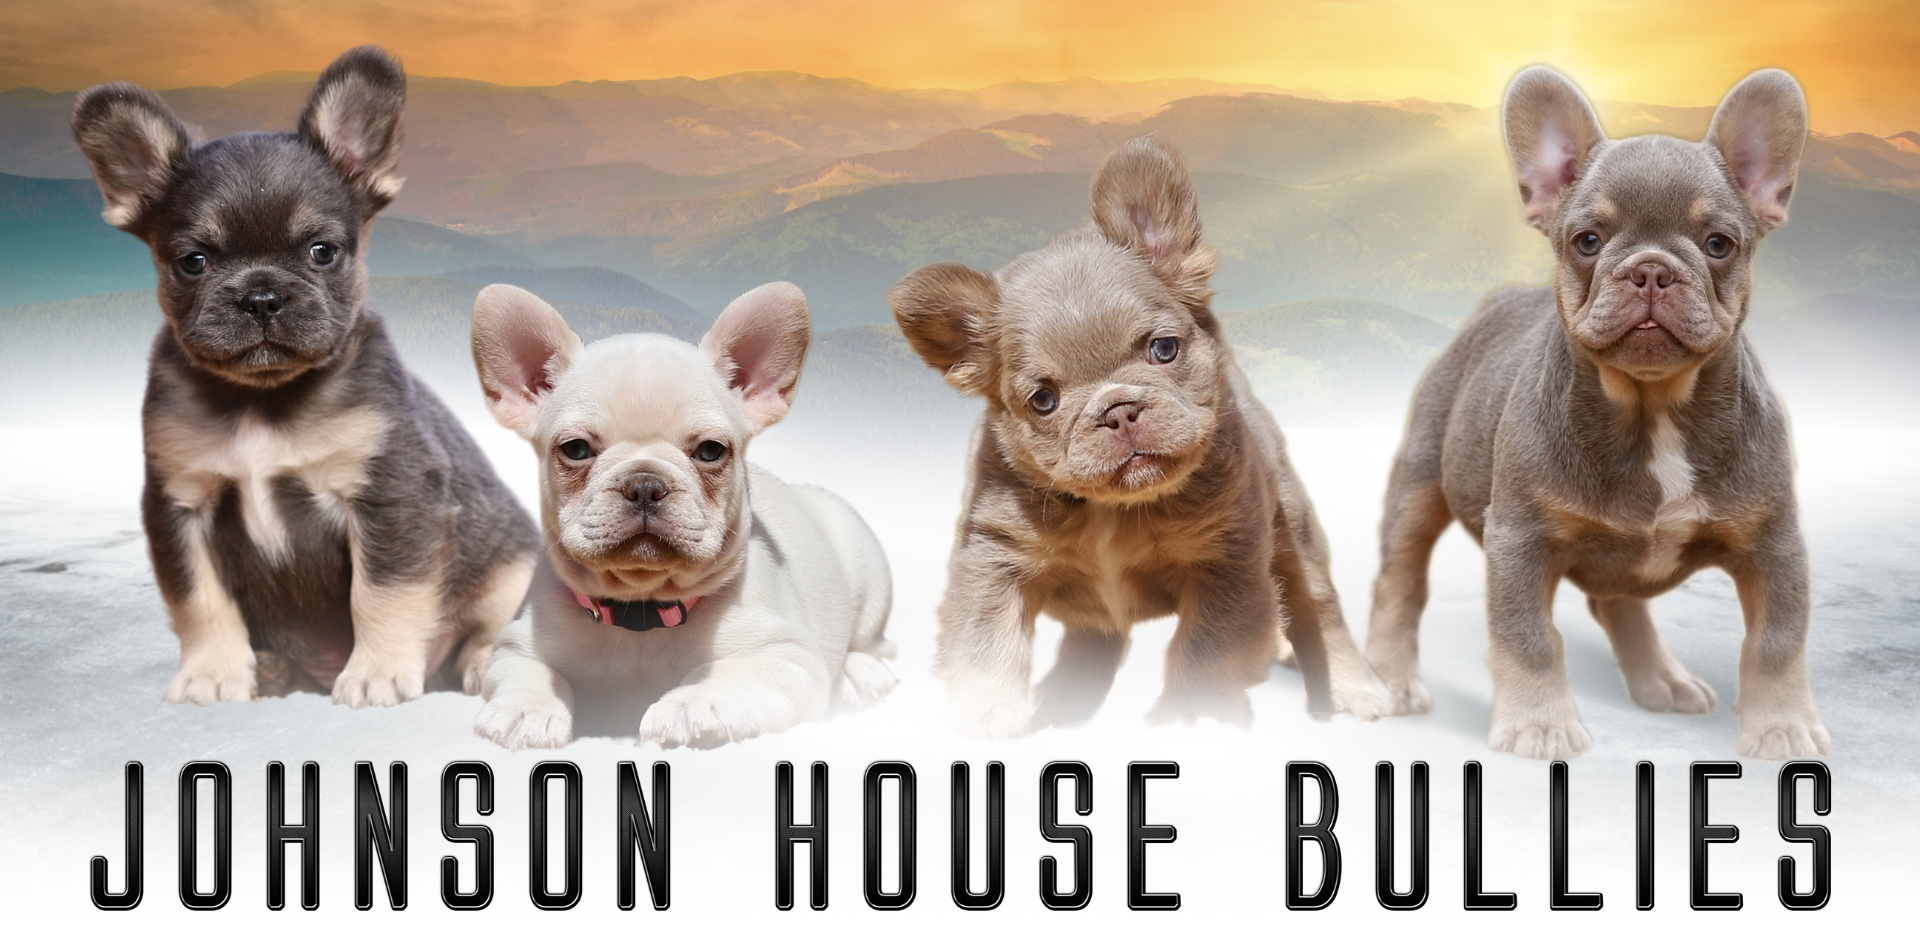 Johnson House Bullies isabella, lilac, blue, chocolate, merle, fluffy french bulldogs for sale tennessee